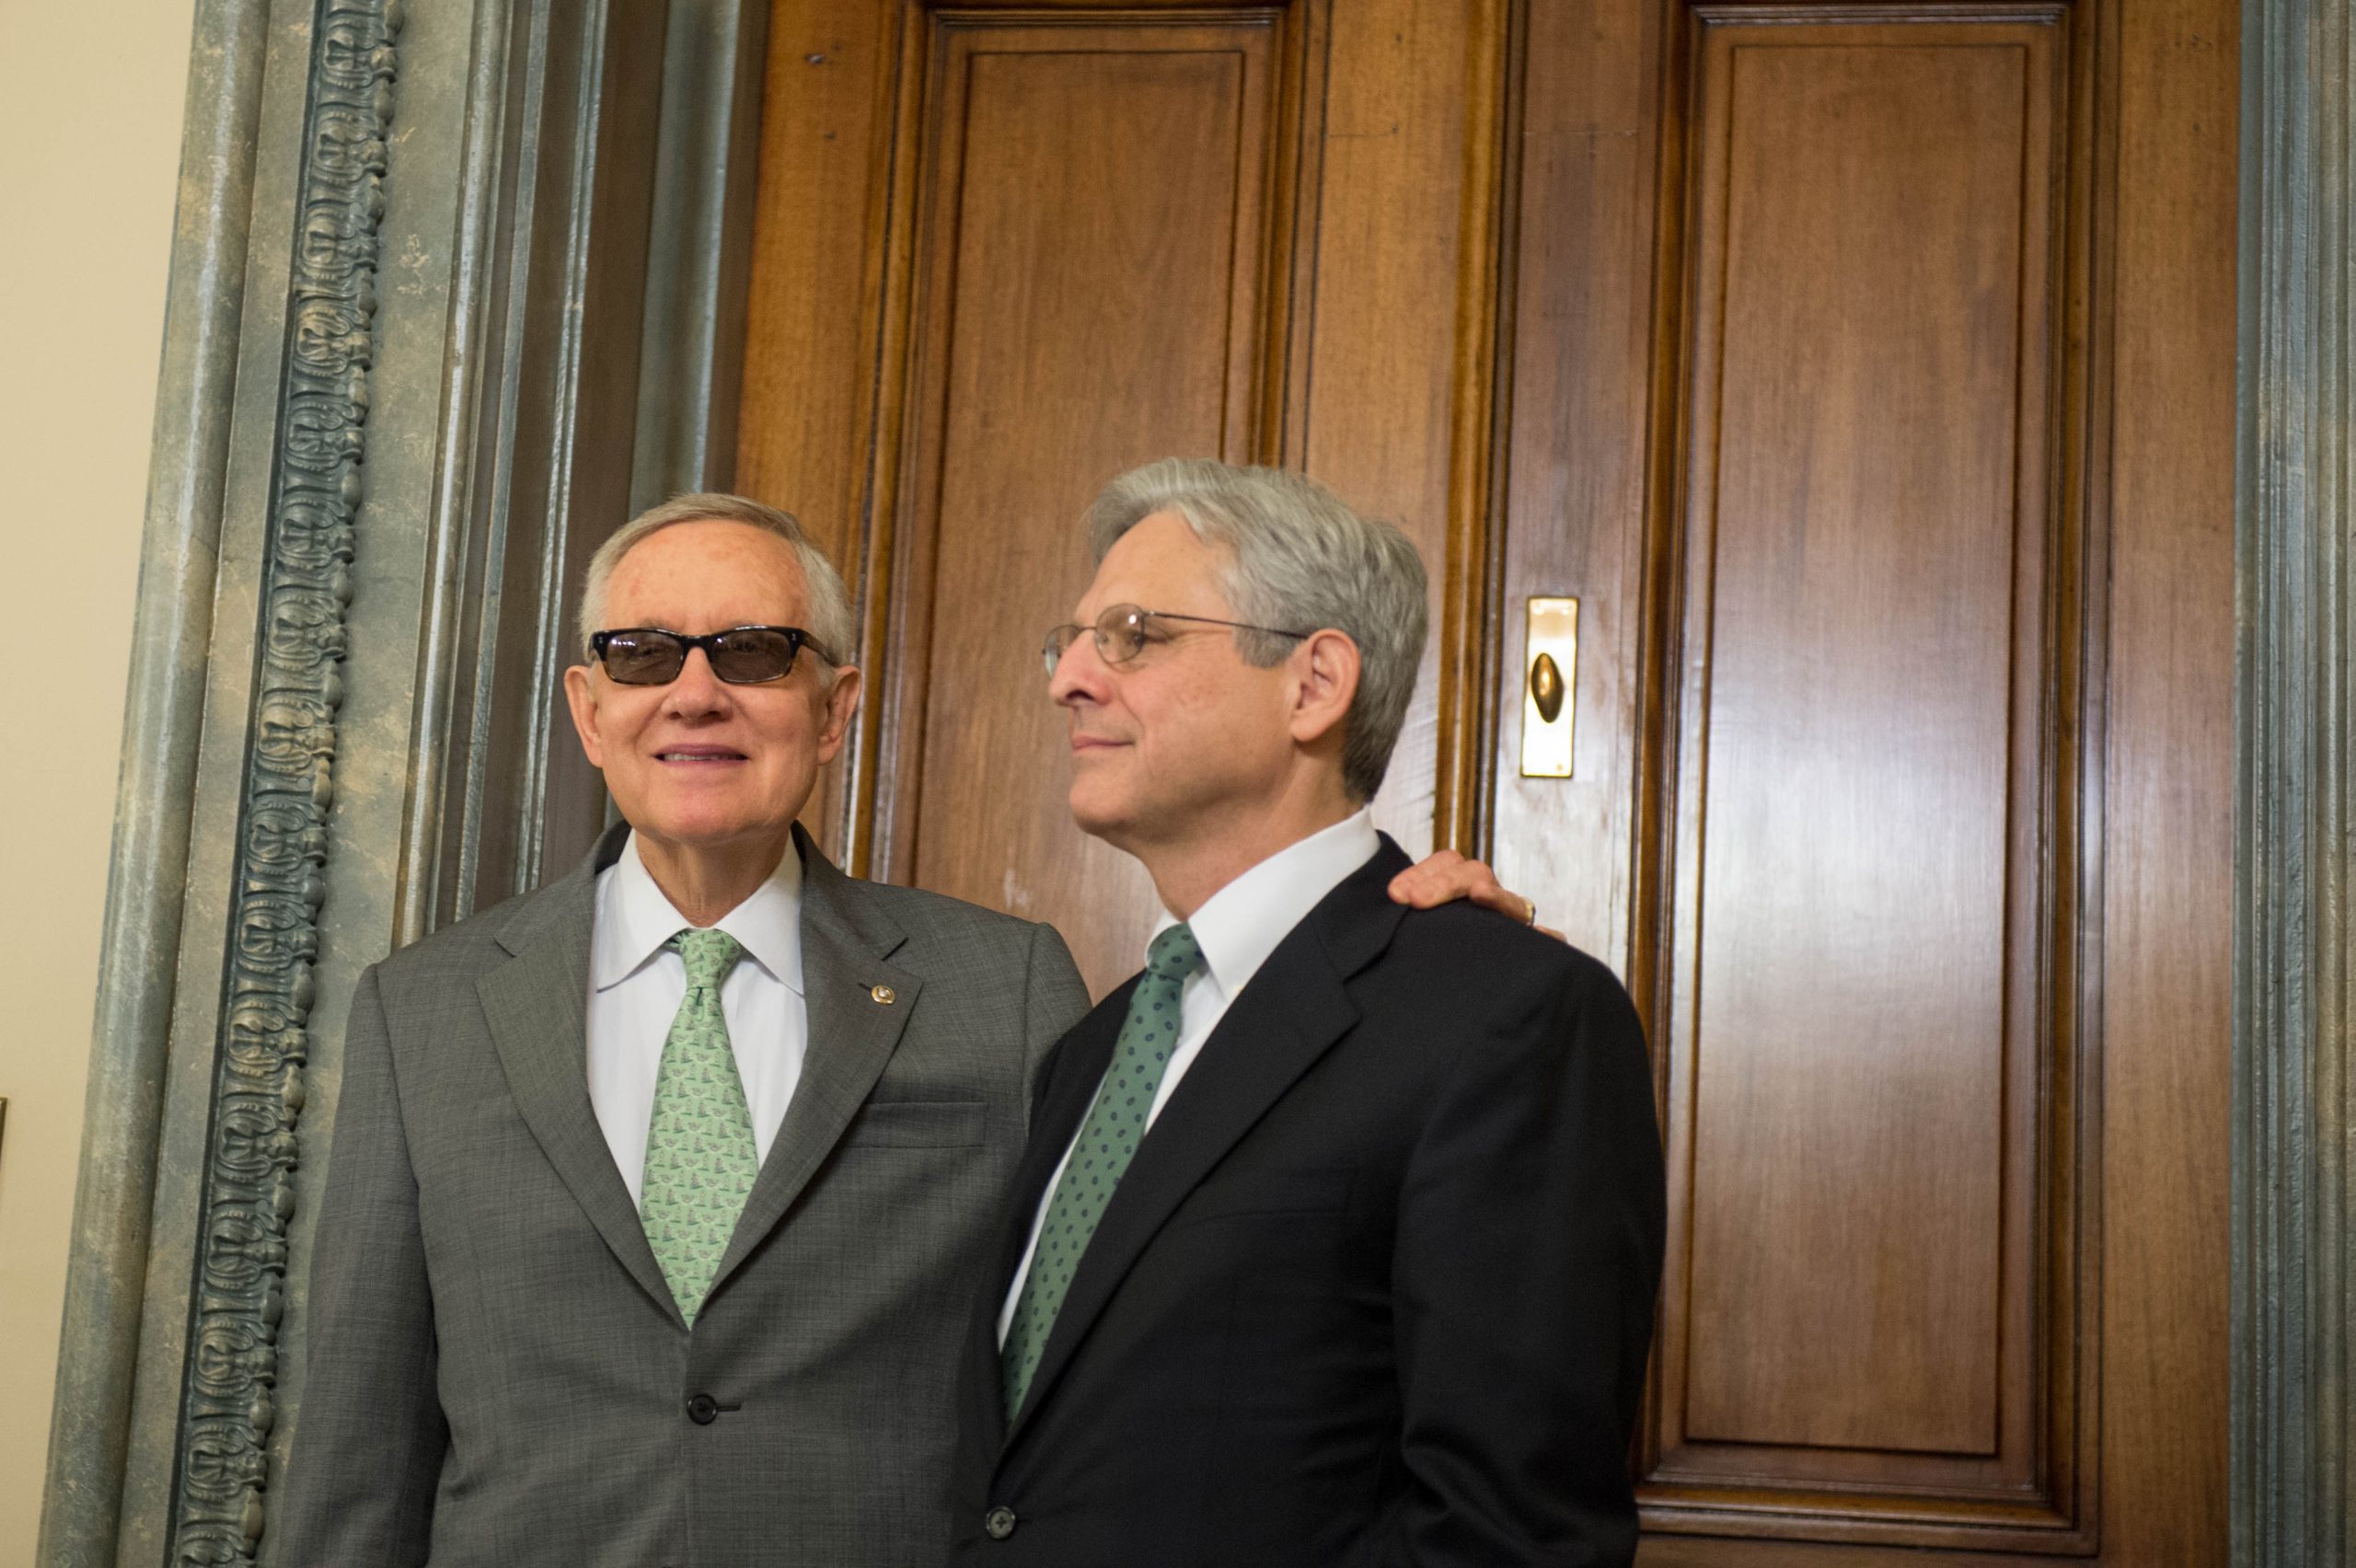 Nevada Senator Harry Reid will  meet with Supreme Court nominee Merrick Garland TODAY, March 17, 2016 at 4 p.m. in room S.224 of the Capitol.